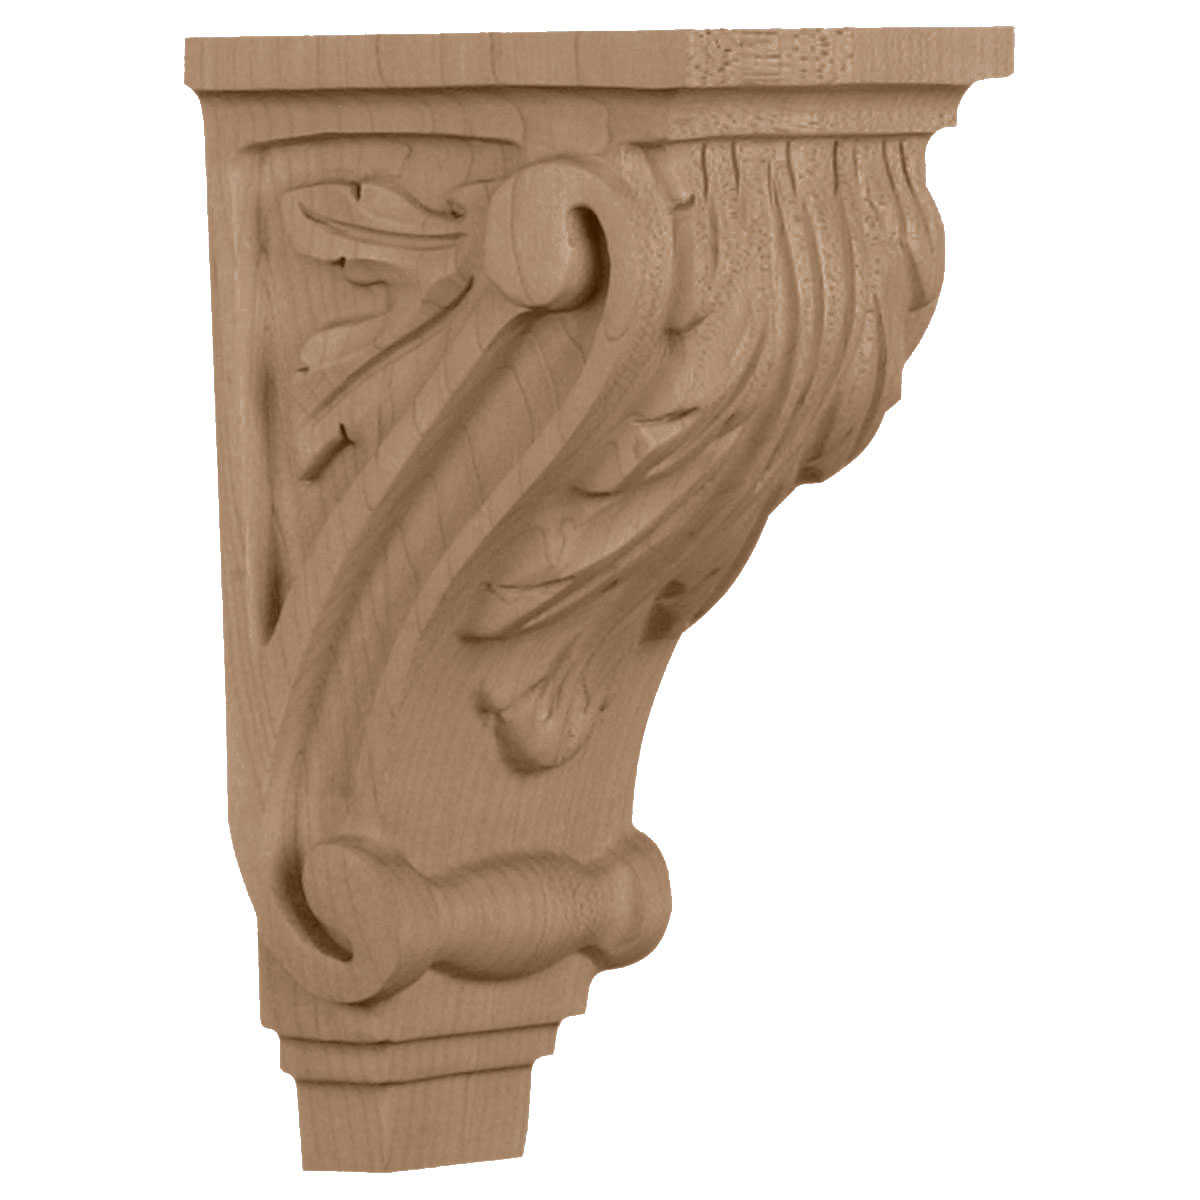 3 1/2'W x 4'D x 7'H, Small Acanthus Corbel, Maple